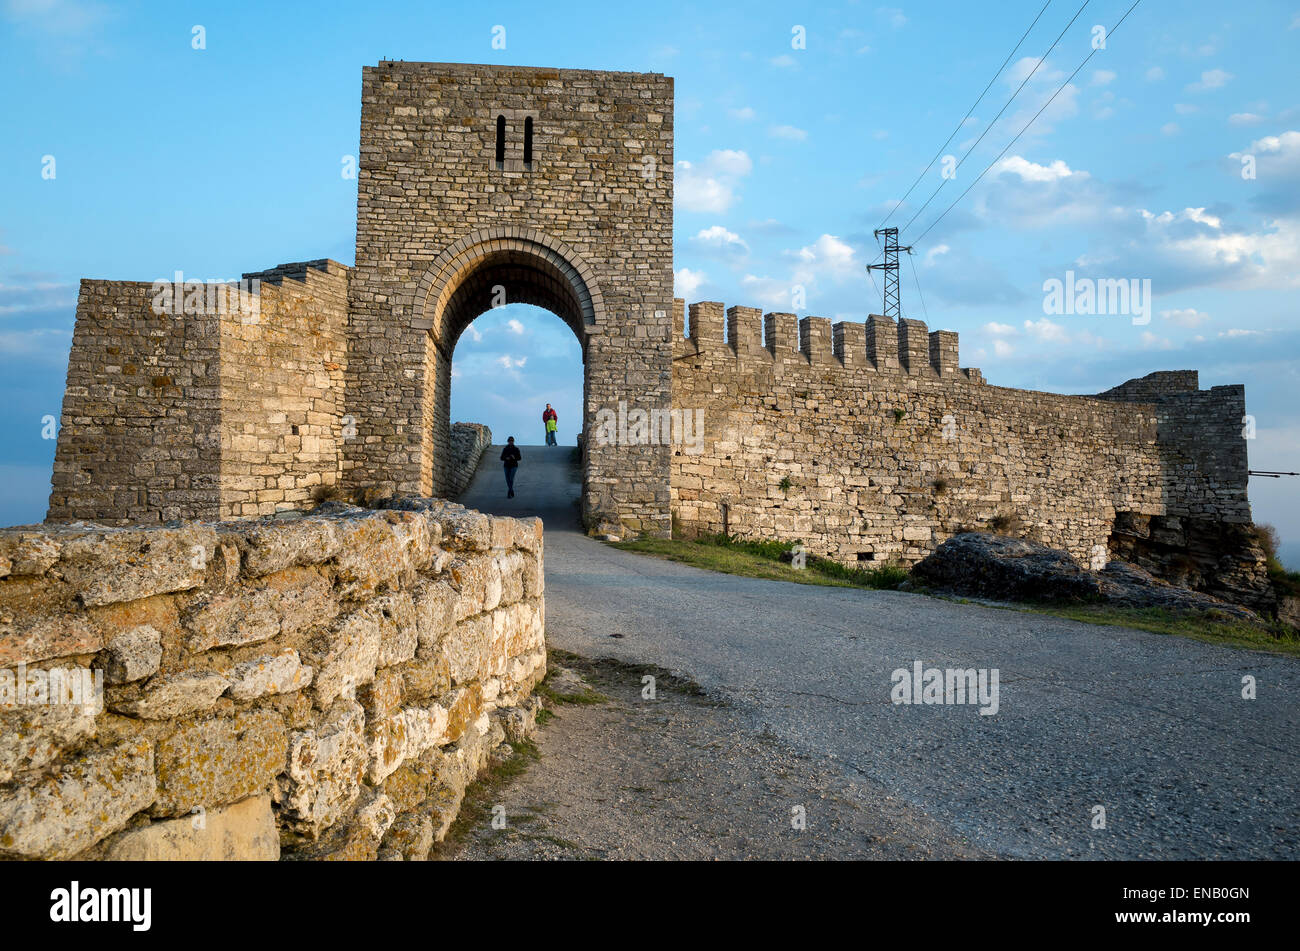 Tower and entry to the Citadel at Cape Kaliakra. Stock Photo